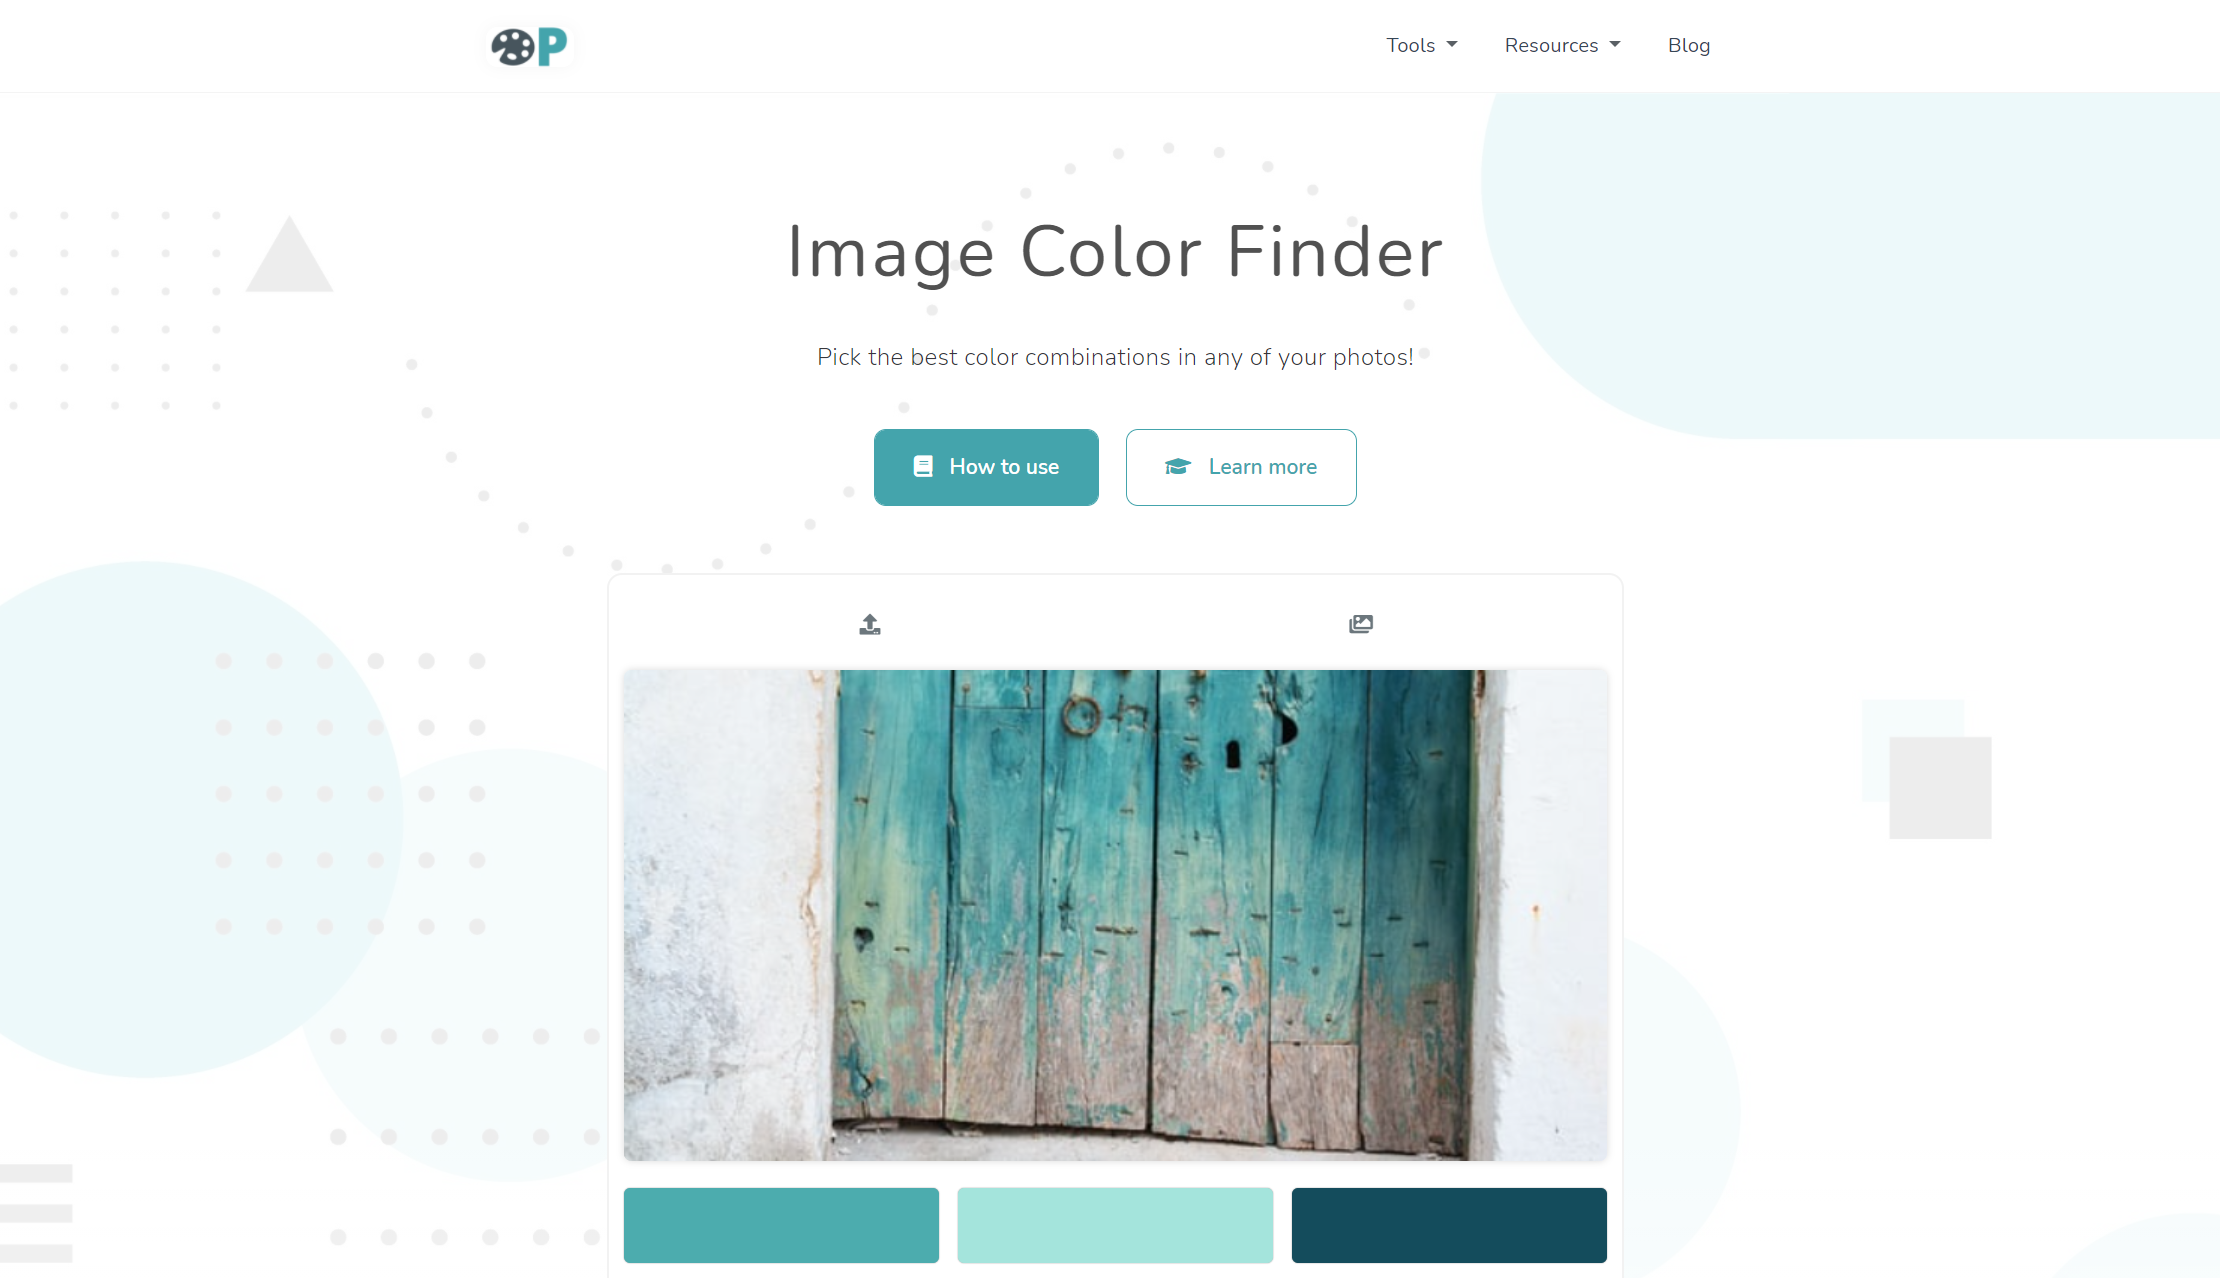 ImageColorFinder Home Page